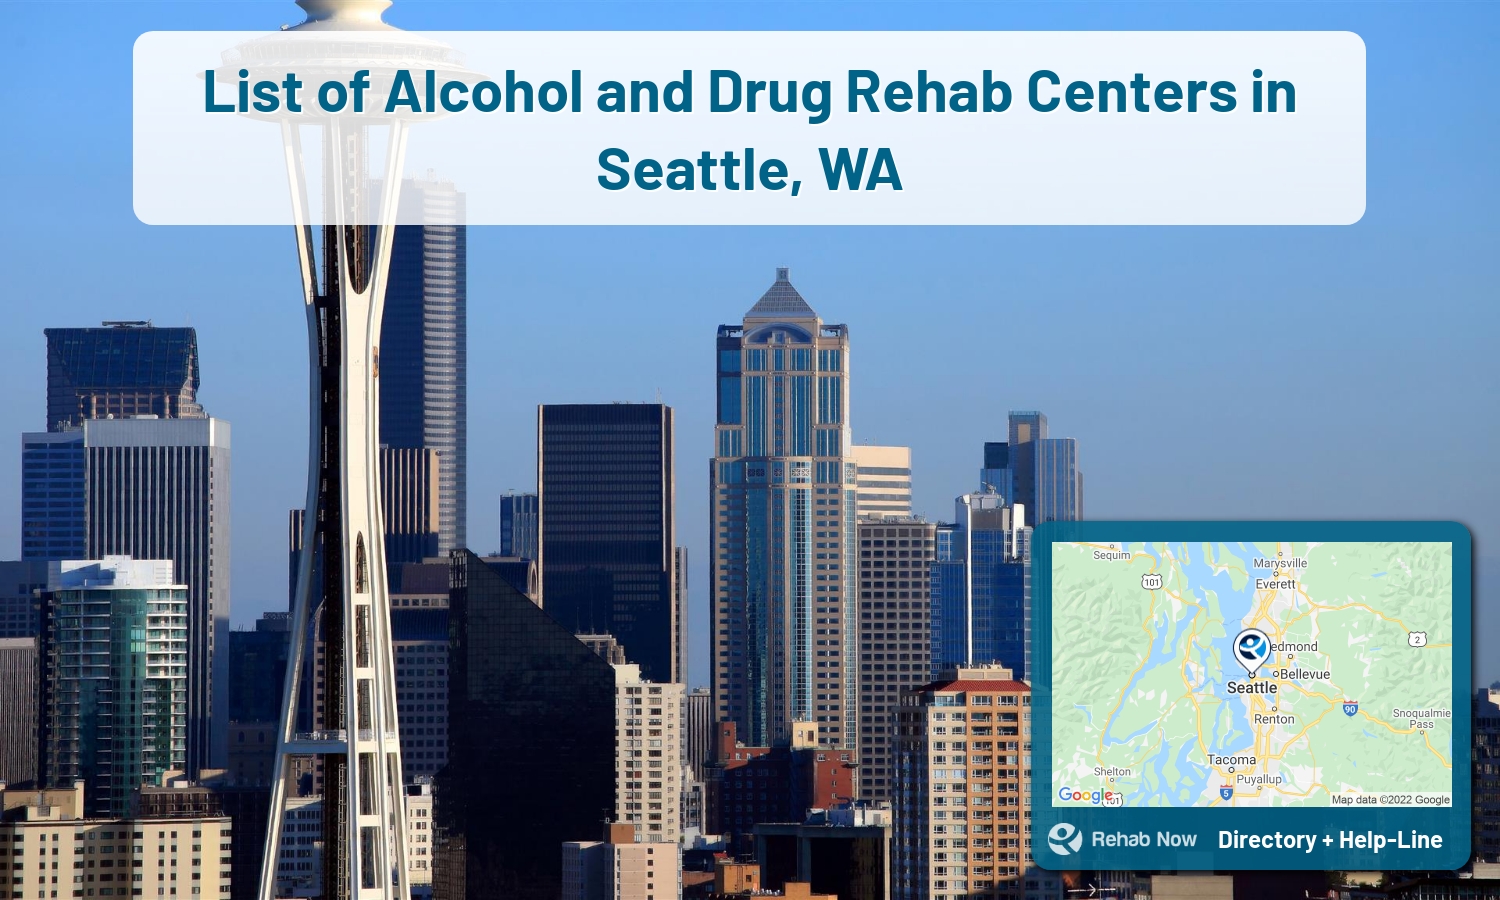 Easily find the top Rehab Centers in Seattle, WA. We researched hard to pick the best alcohol and drug rehab centers in Washington.